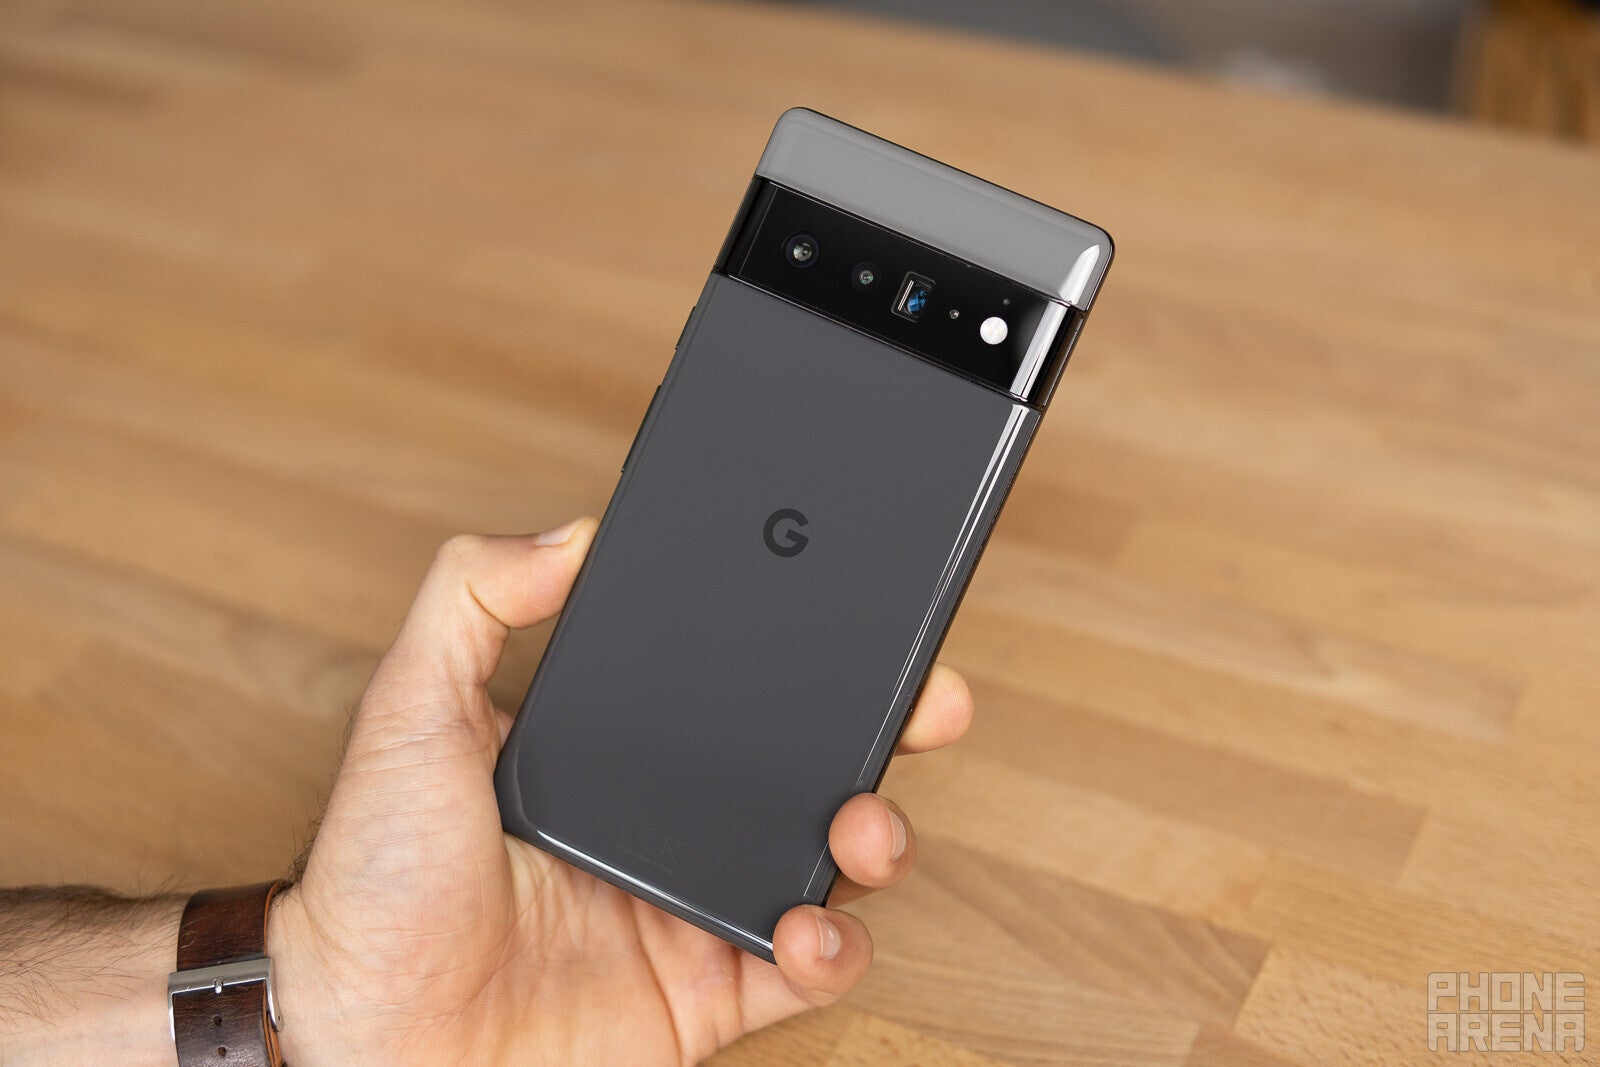 The Pixel 6 Pro can add a secure facial recognition system via a software update - Accuracy, battery issues have kept Face unlock from the Pixel 6 Pro